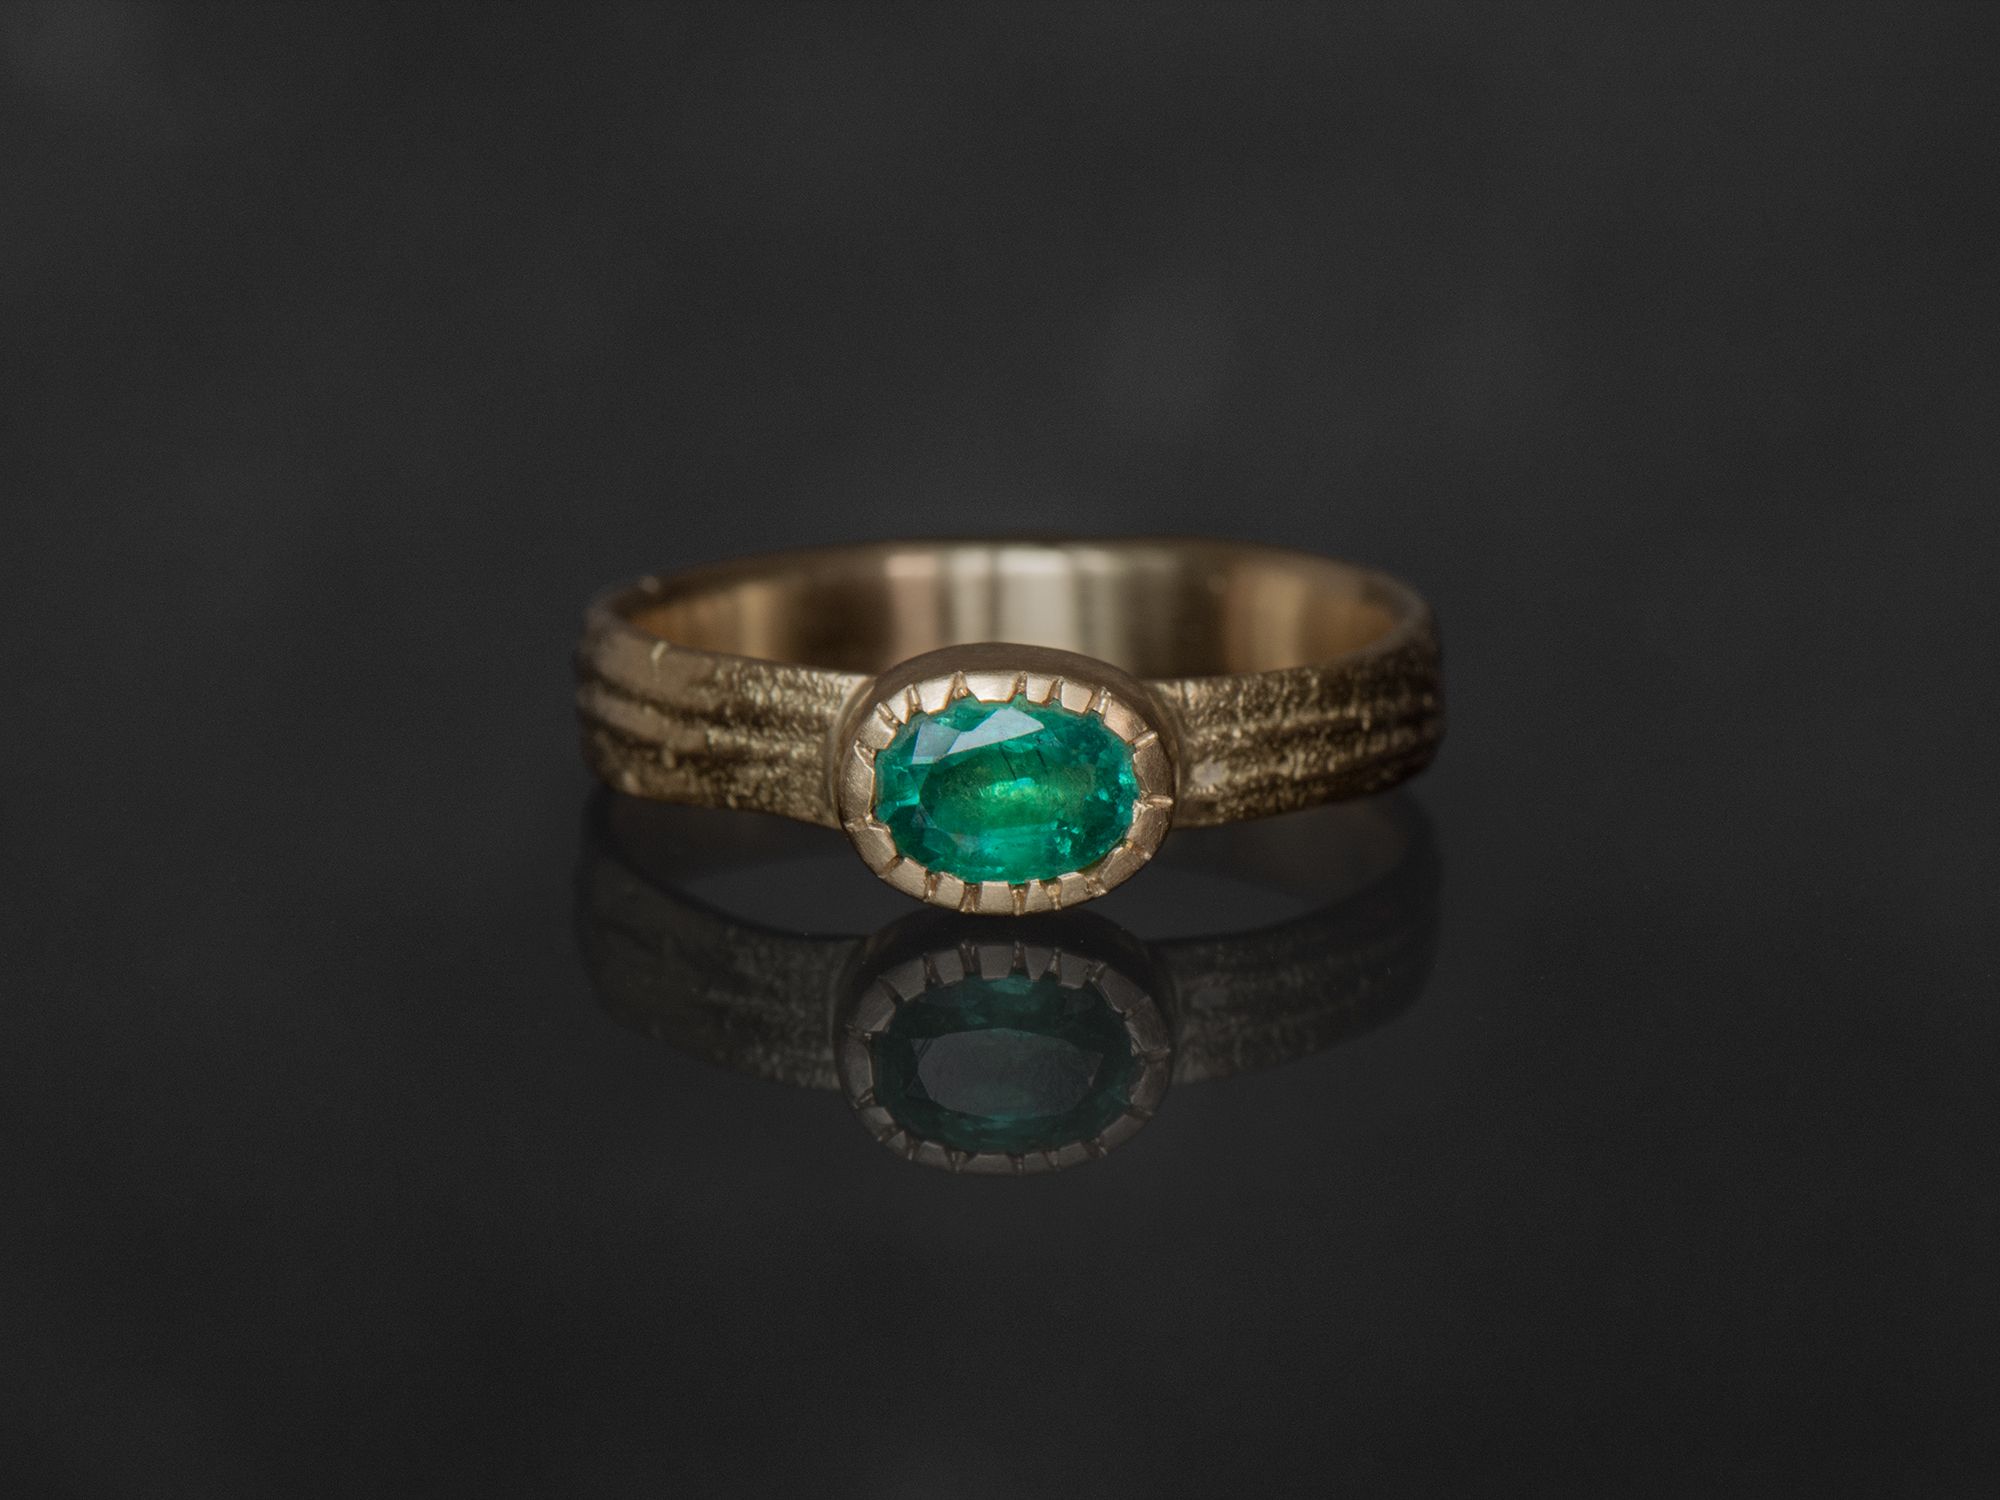 Ana Sitia large emerald ring by Emmanuelle Zysman